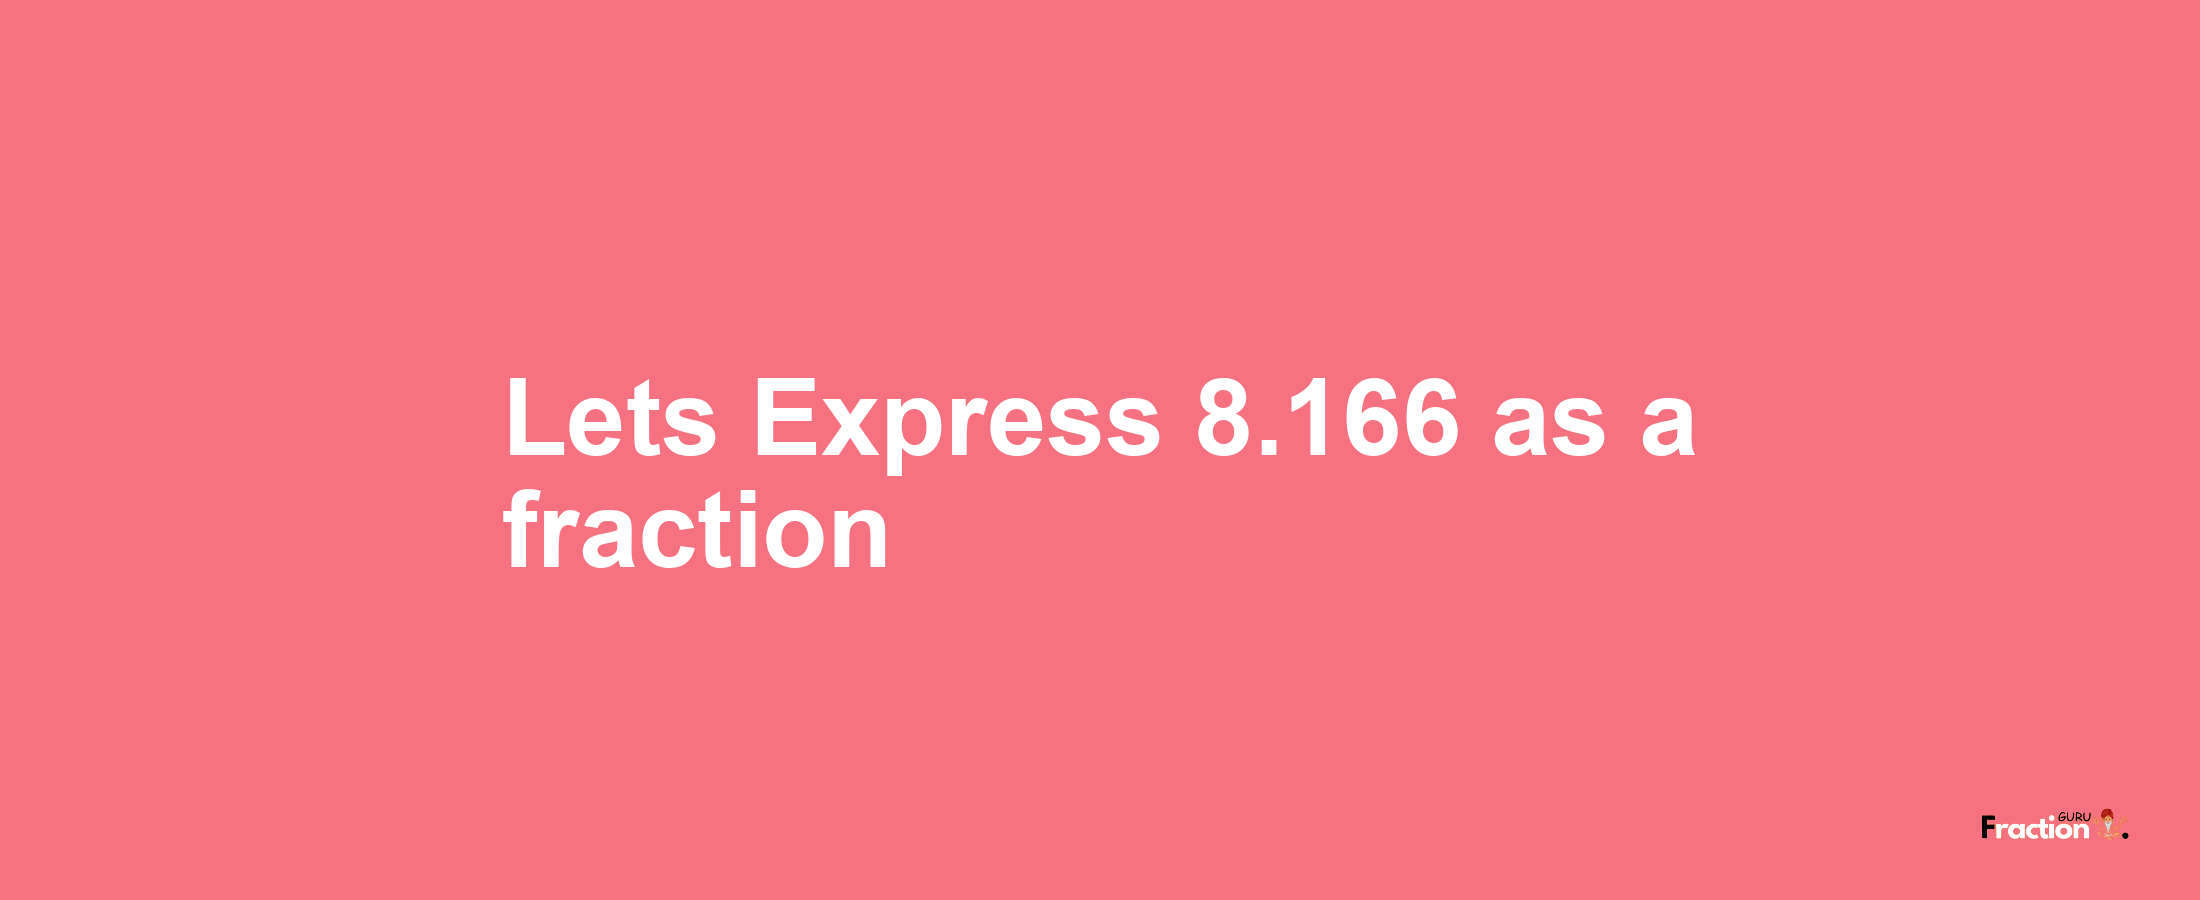 Lets Express 8.166 as afraction